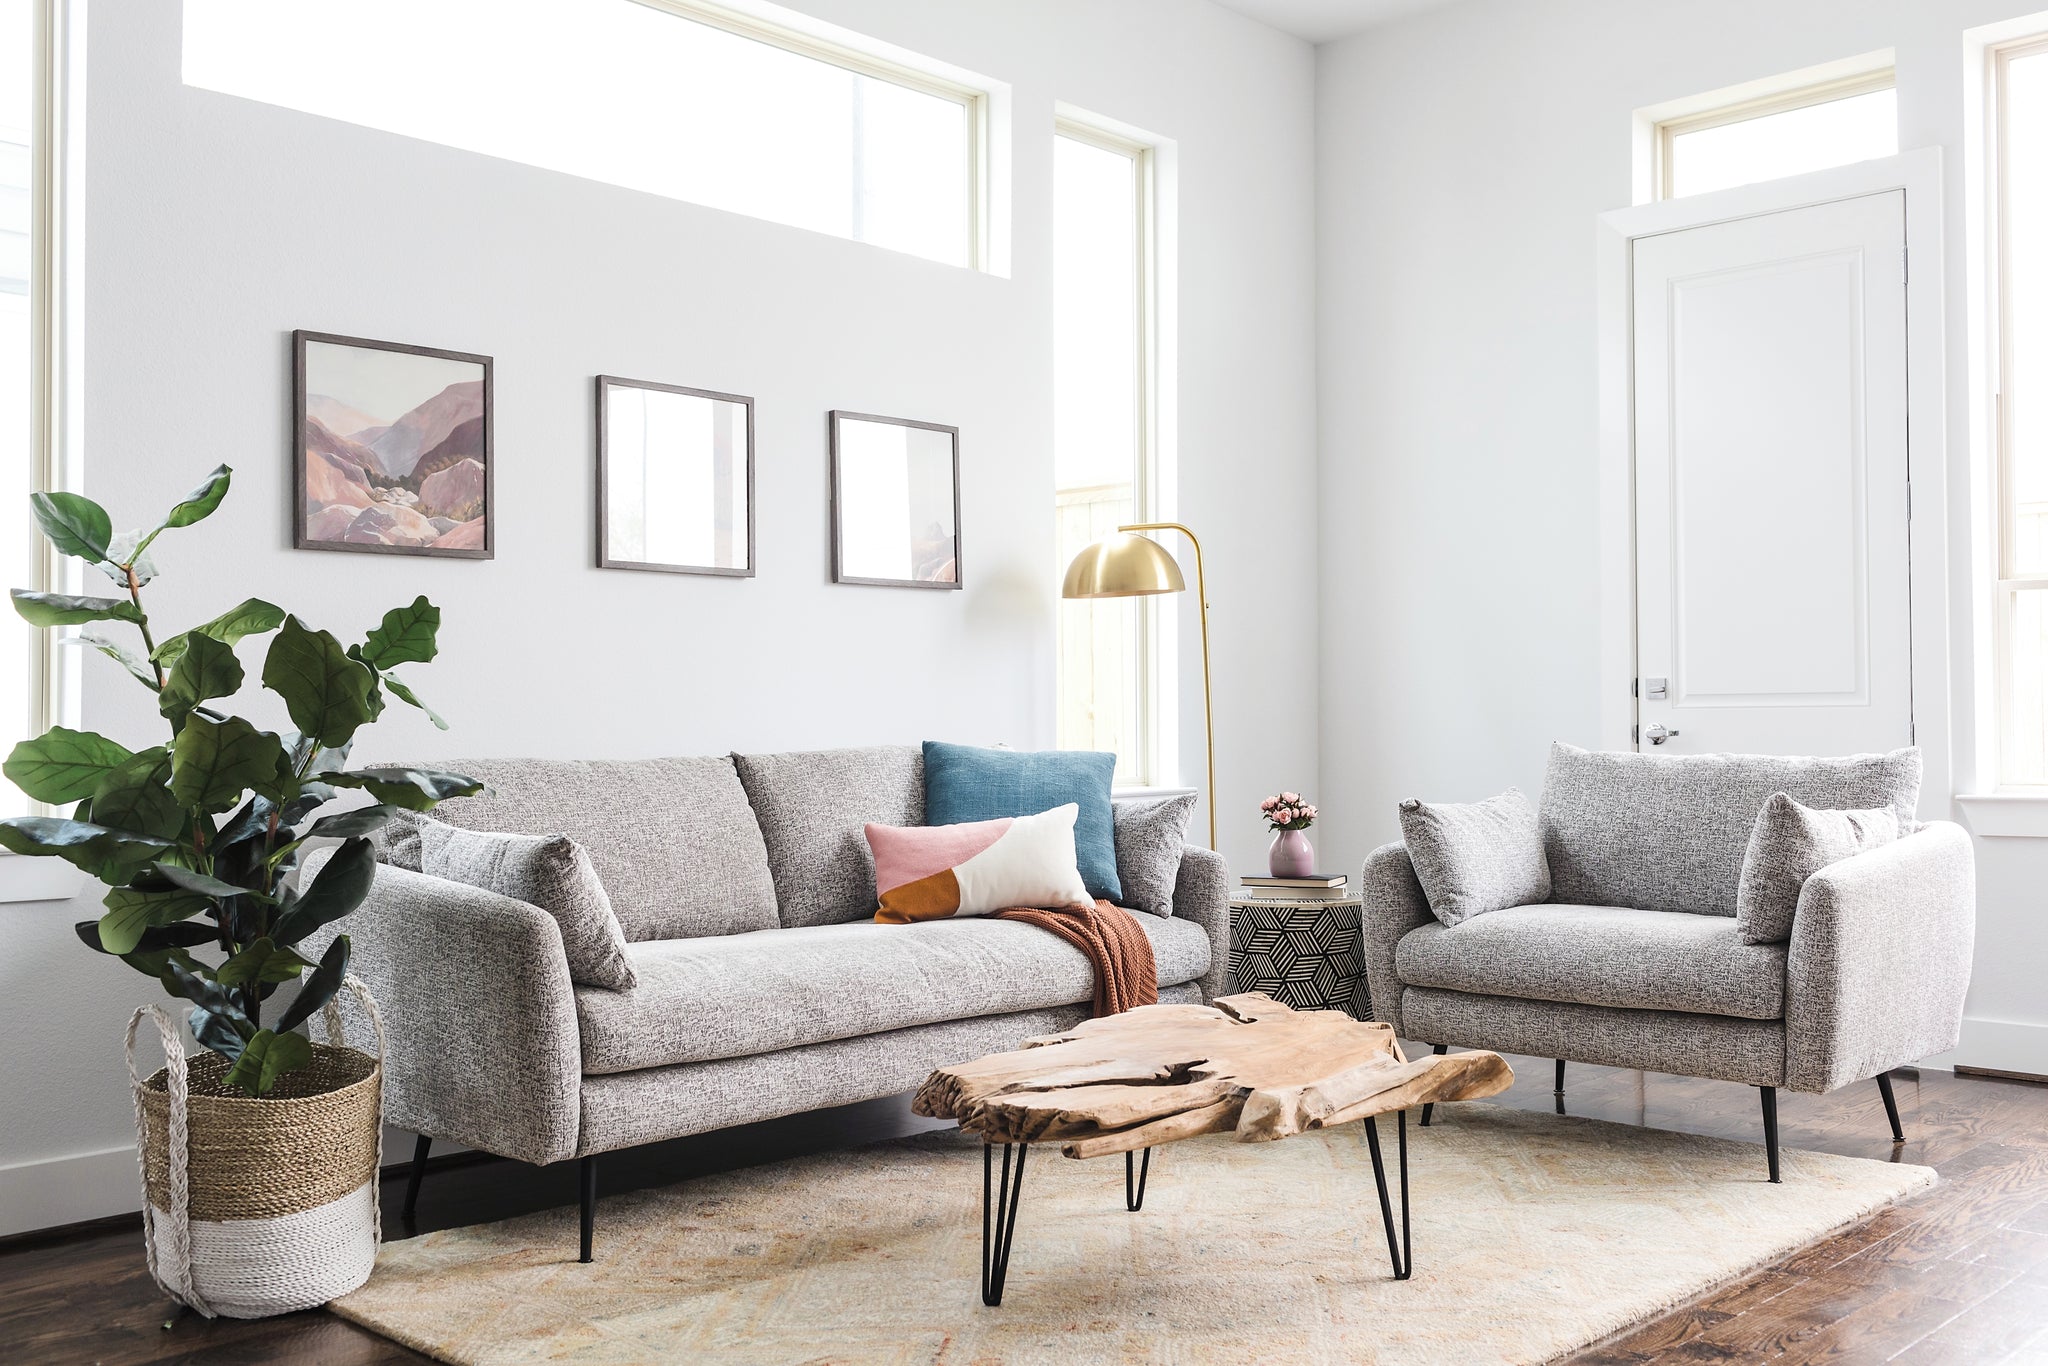 park sofa shown in grey fabric with black legs